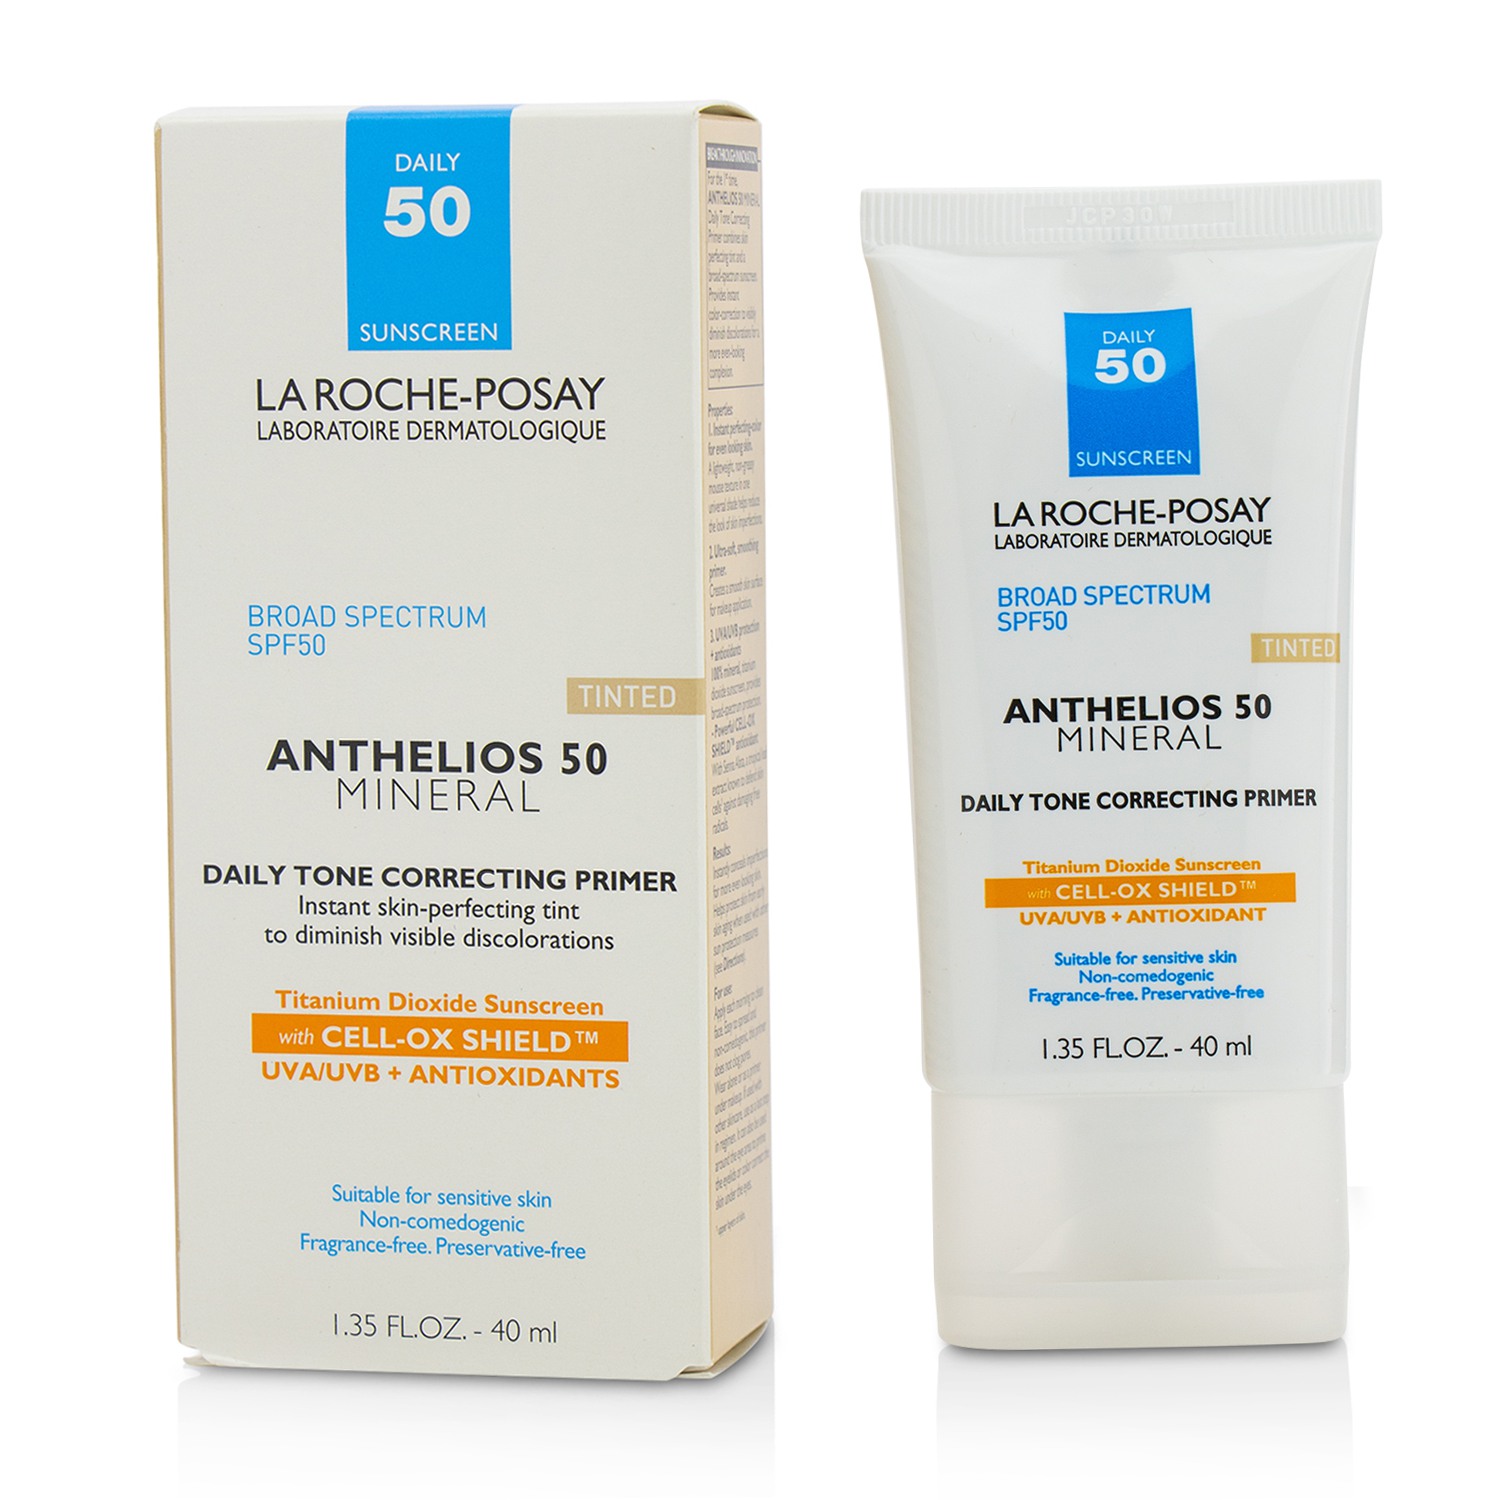 Anthelios 50 Mineral Tinted Daily Tone Correcting Primer SPF50 La Roche Posay Image